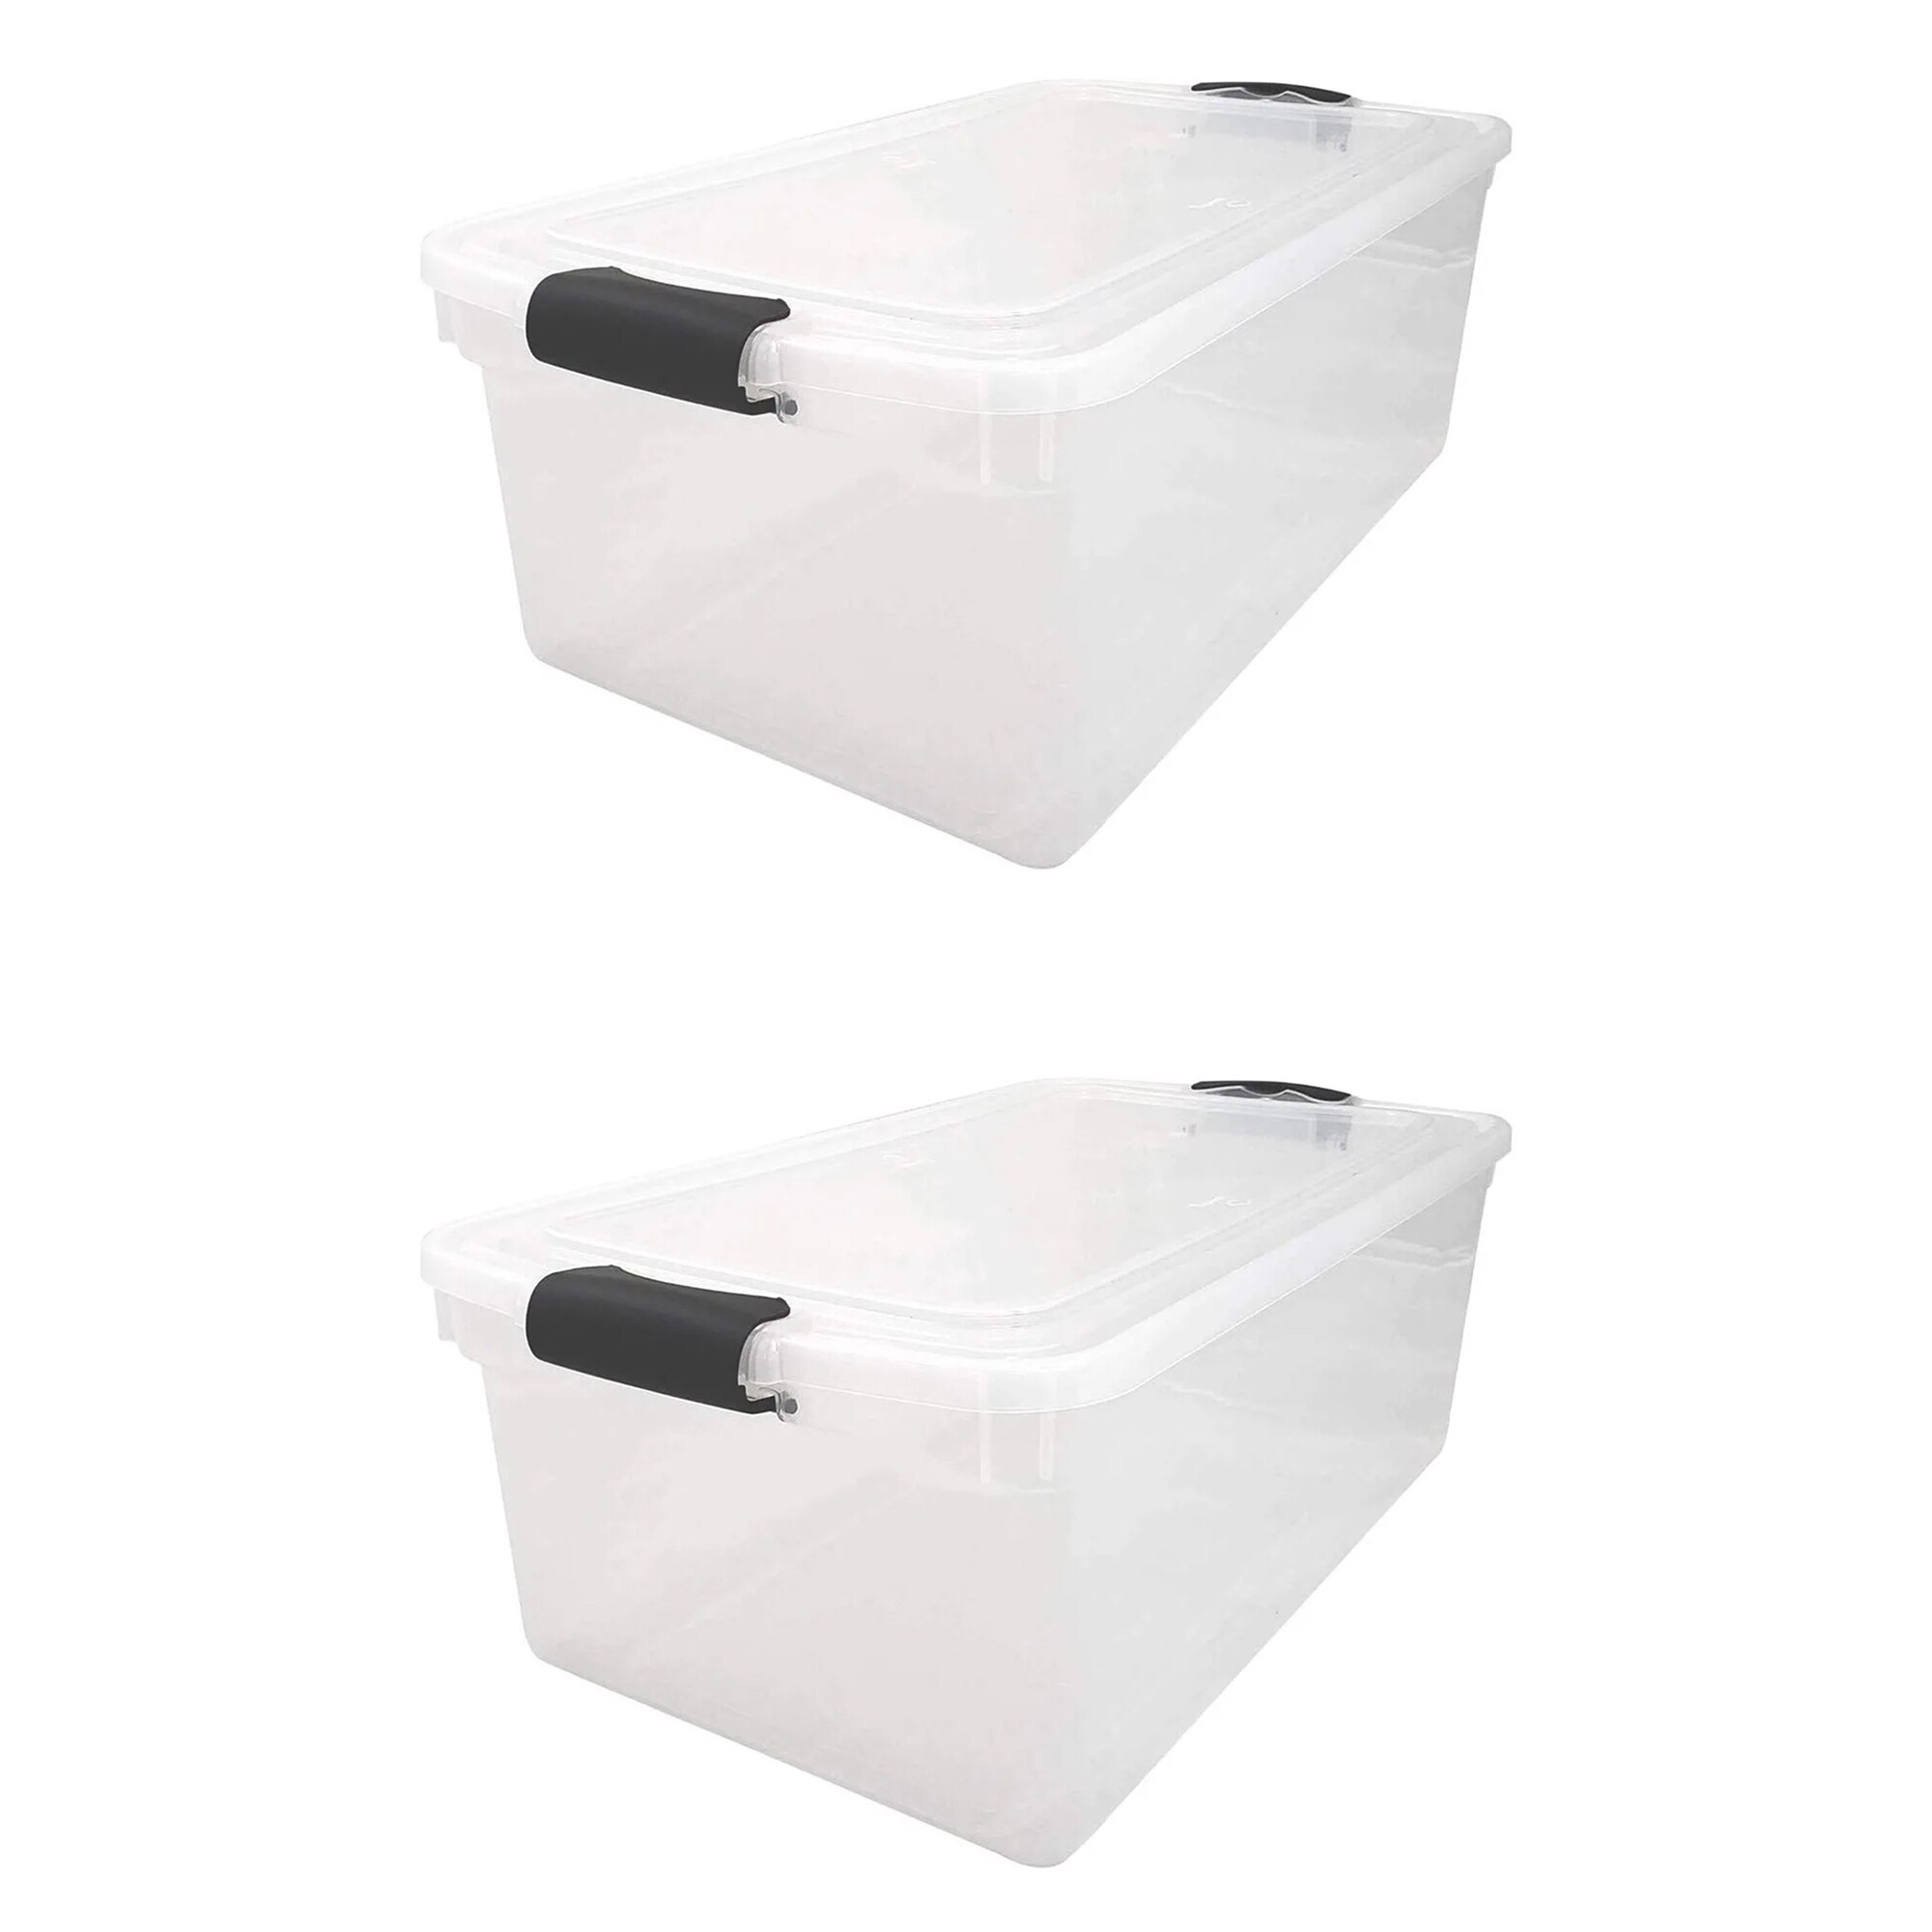 https://ak1.ostkcdn.com/images/products/is/images/direct/e7f29042472eb7f71bf834b278c6ddd7581f7a35/Homz-66-Qt-Clear-Storage-Organizing-Container-Bin-with-Latching-Lids-%284-Pack%29.jpg